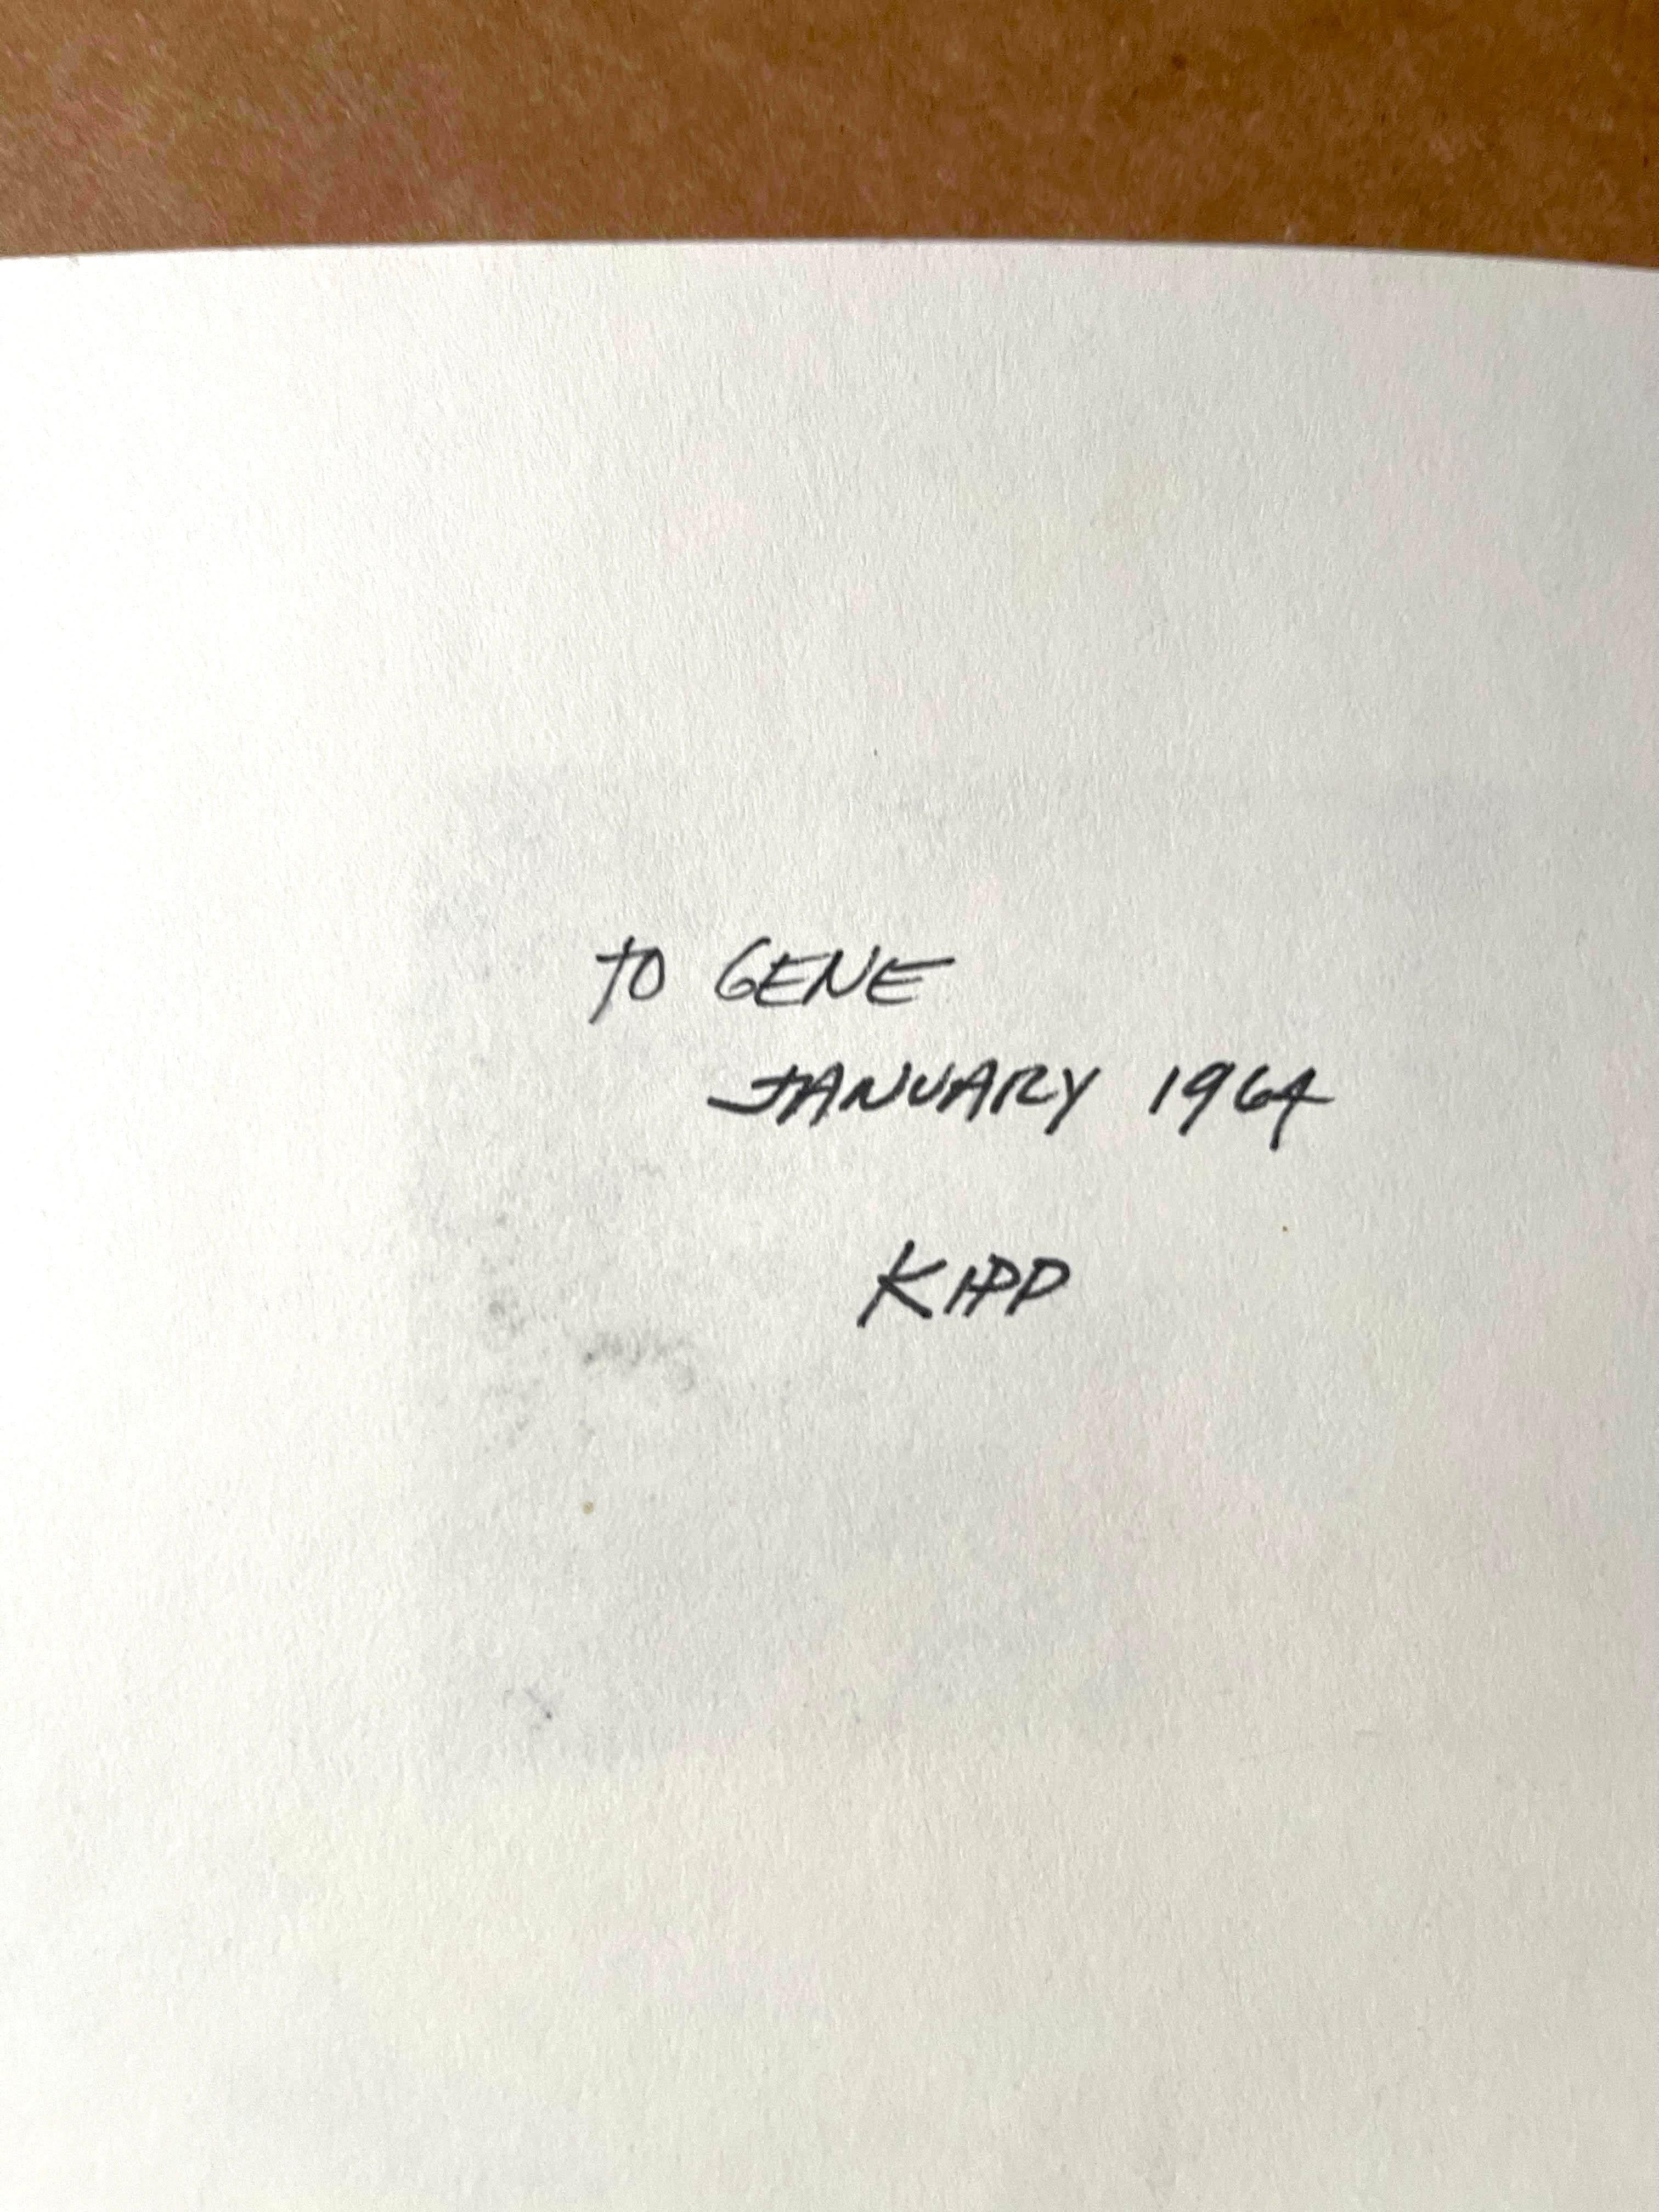 Lyman Kipp
Untitled Minimalist Painting, 1964
Ink roller on paper
Hand signed and dated by Lyman Kipp on the front; inscribed on the back to Gene Baro (the distinguished critic and curator who died in 1982)
14 × 21 1/2 inches
Unframed
Provenance: